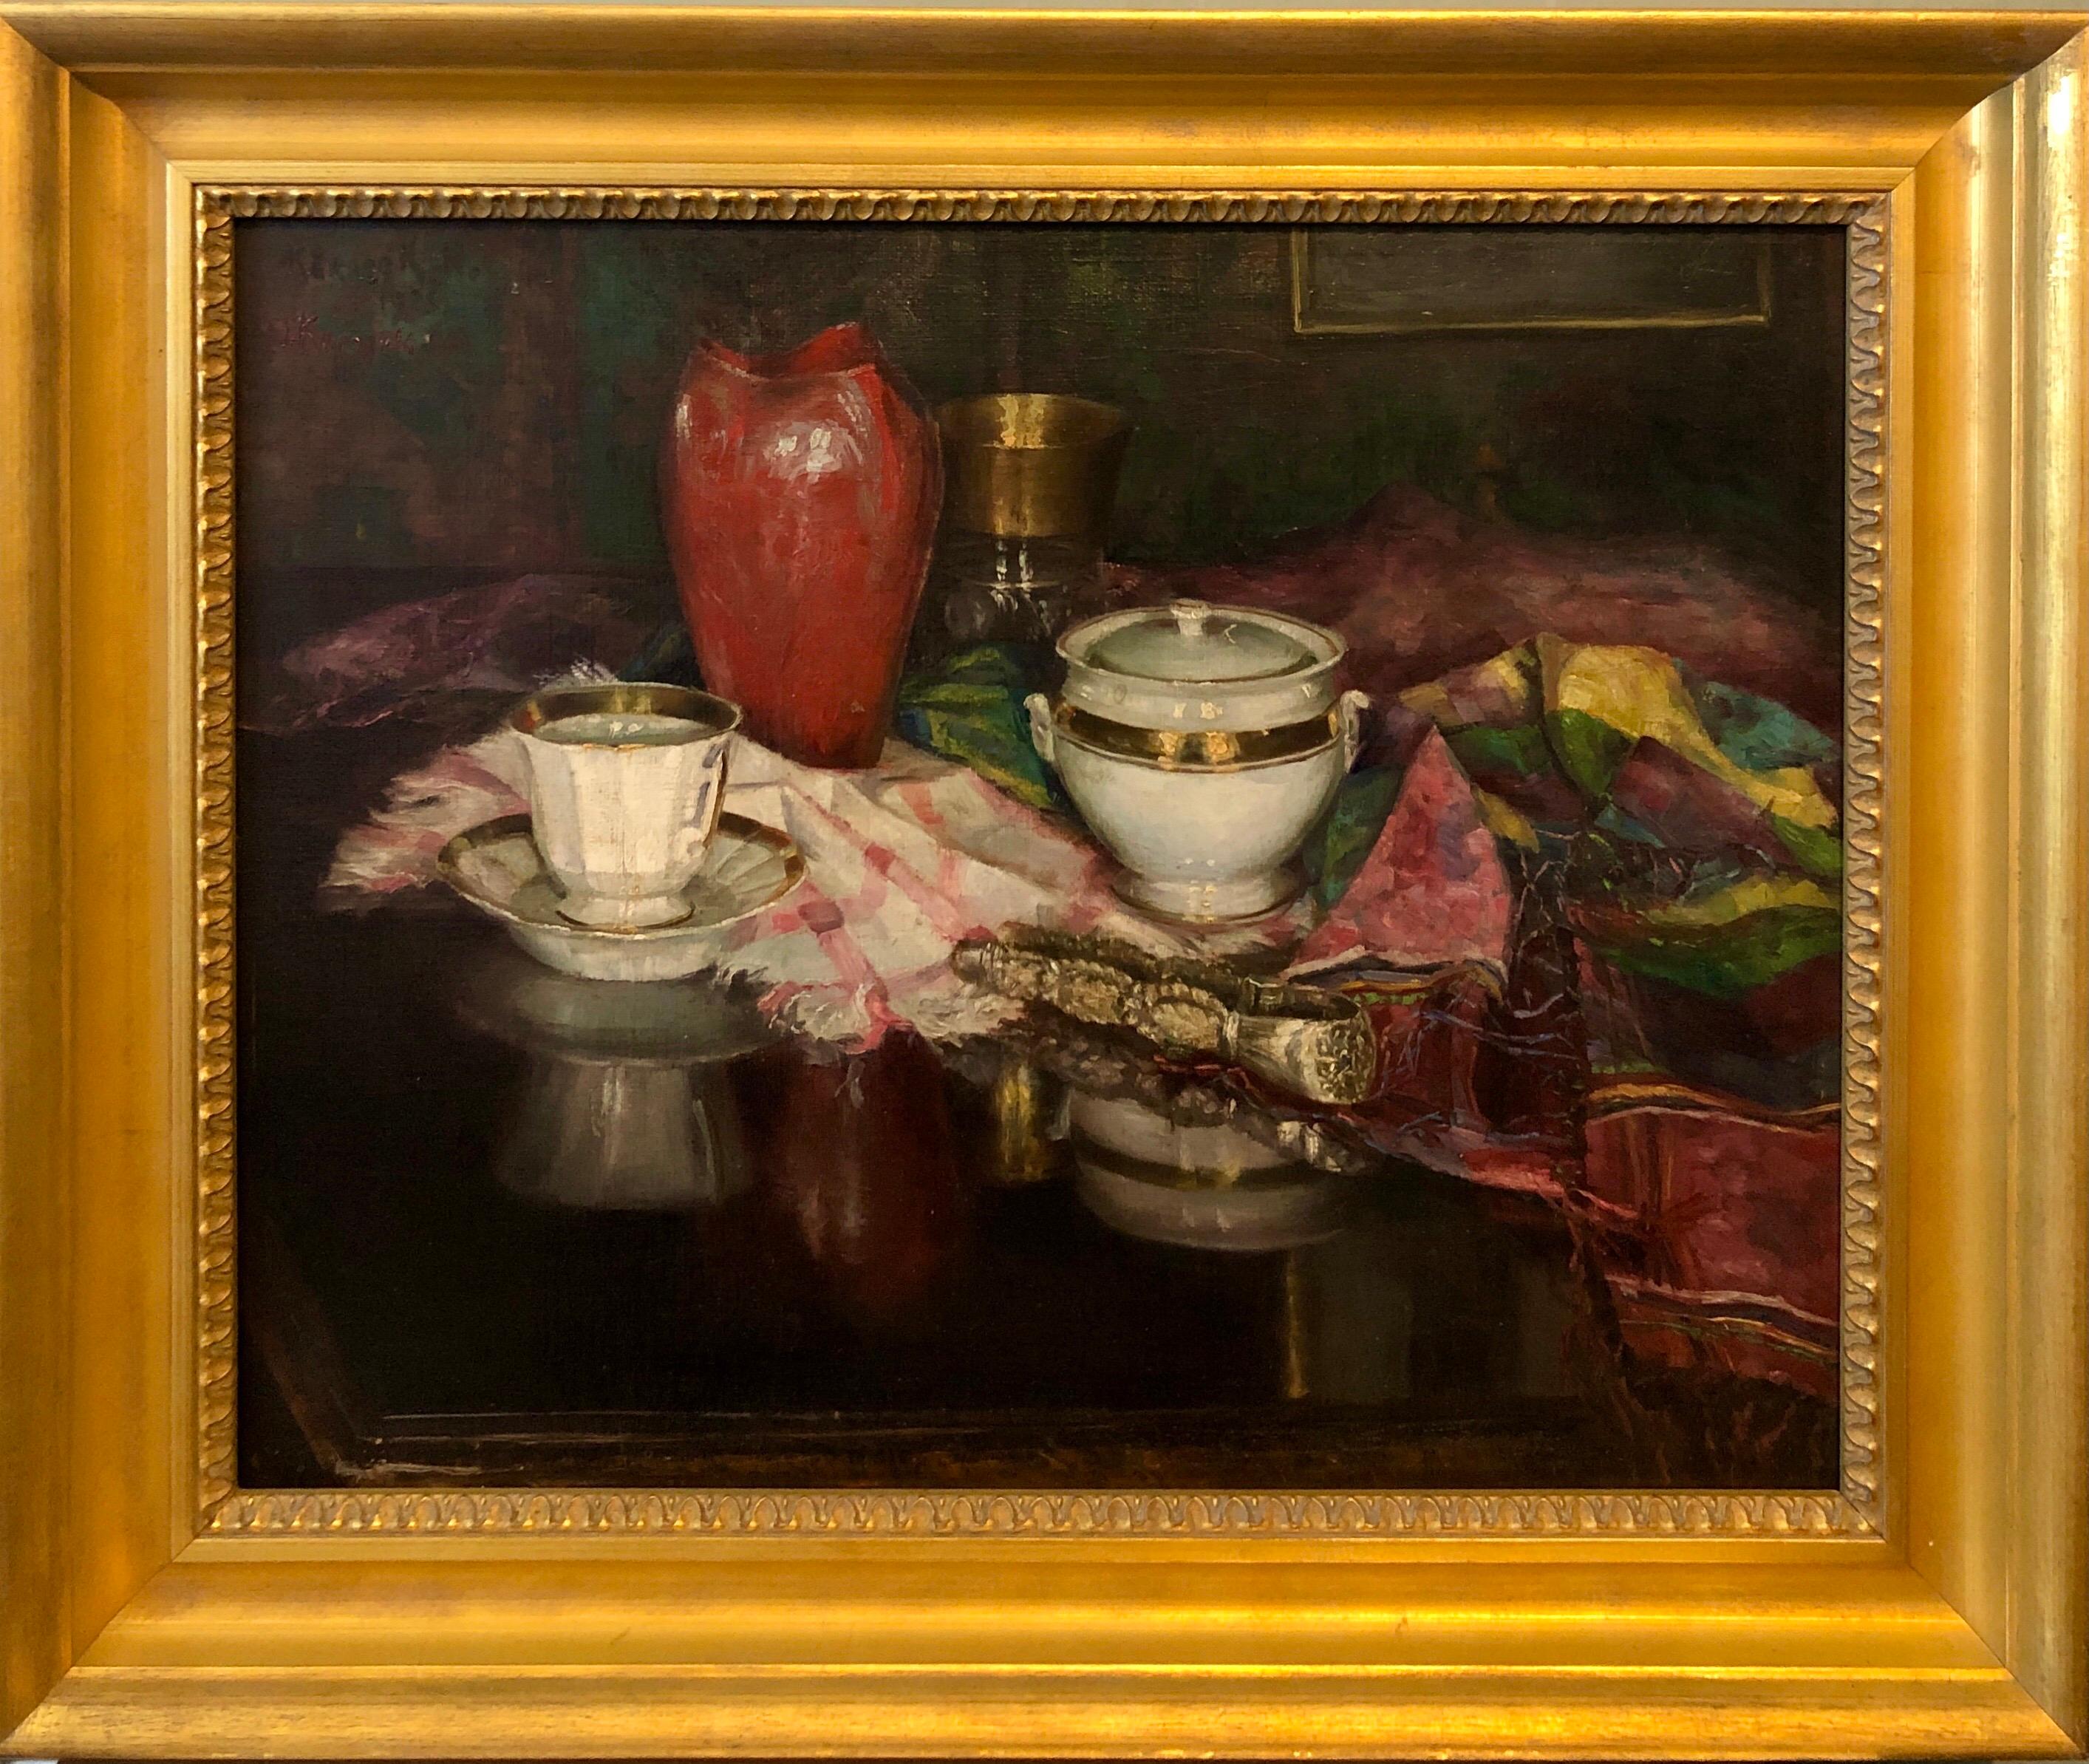 1925 Viennese Oil Painting Interior Still Life with Porcelain Vase, Tapestry Rug